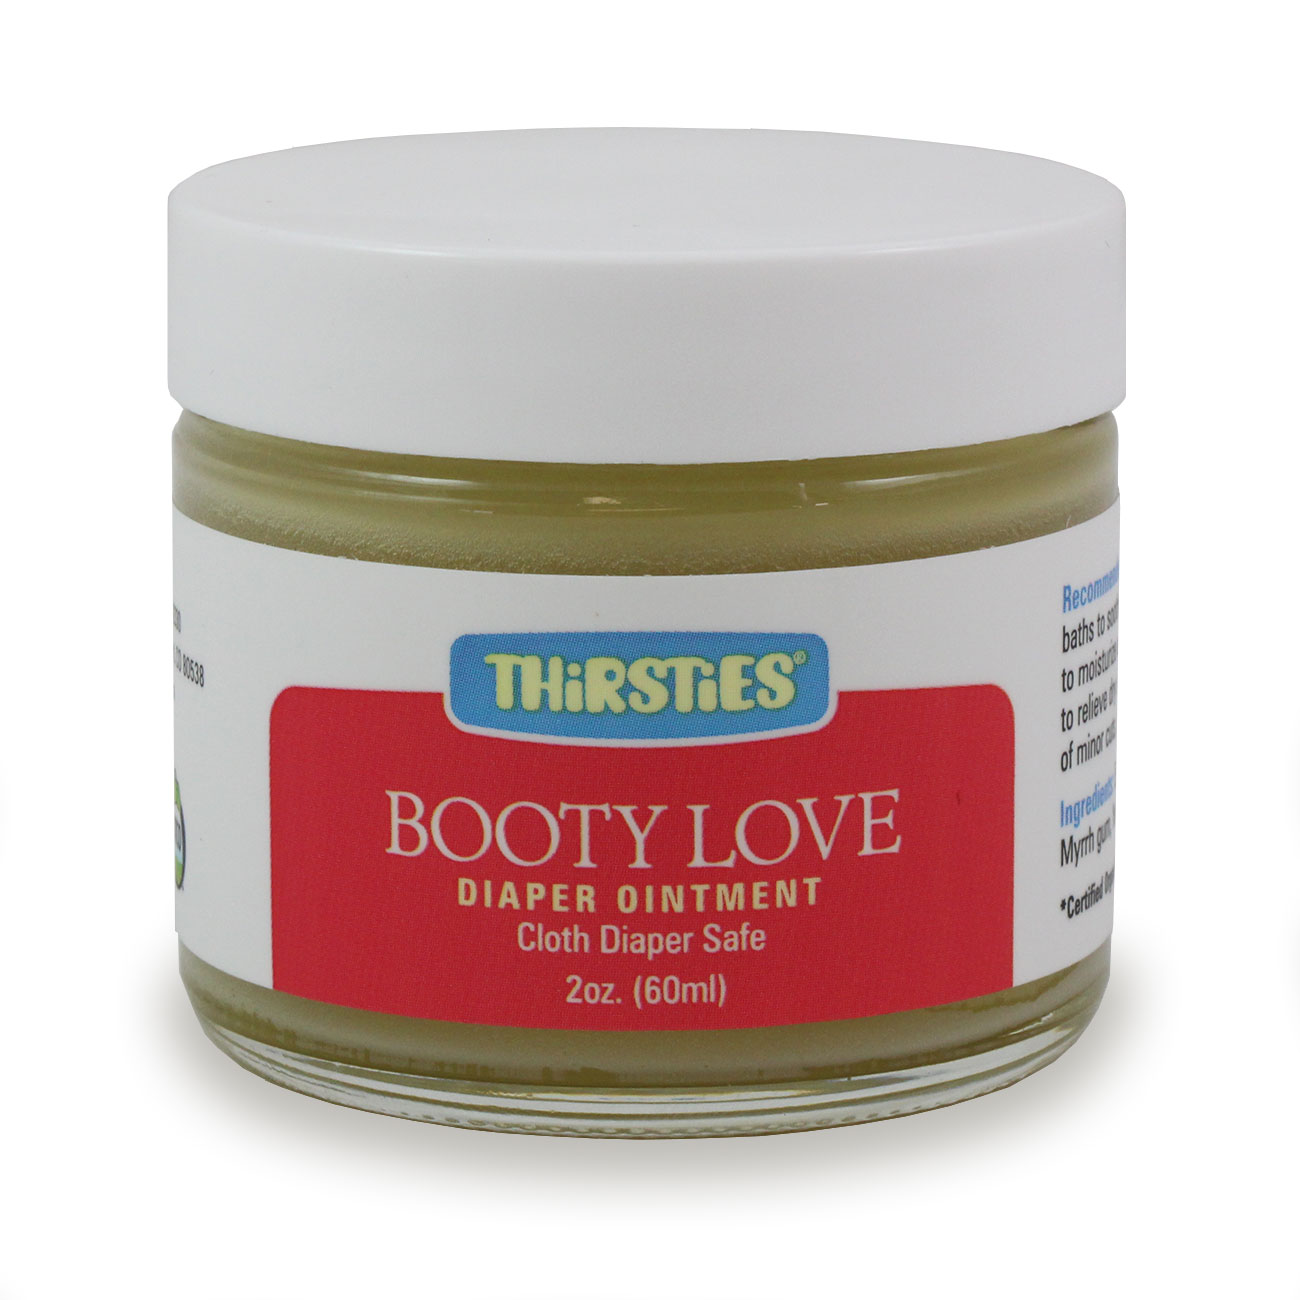 Thirsties Booty Love Cloth Diaper Ointment at Diaper Stork